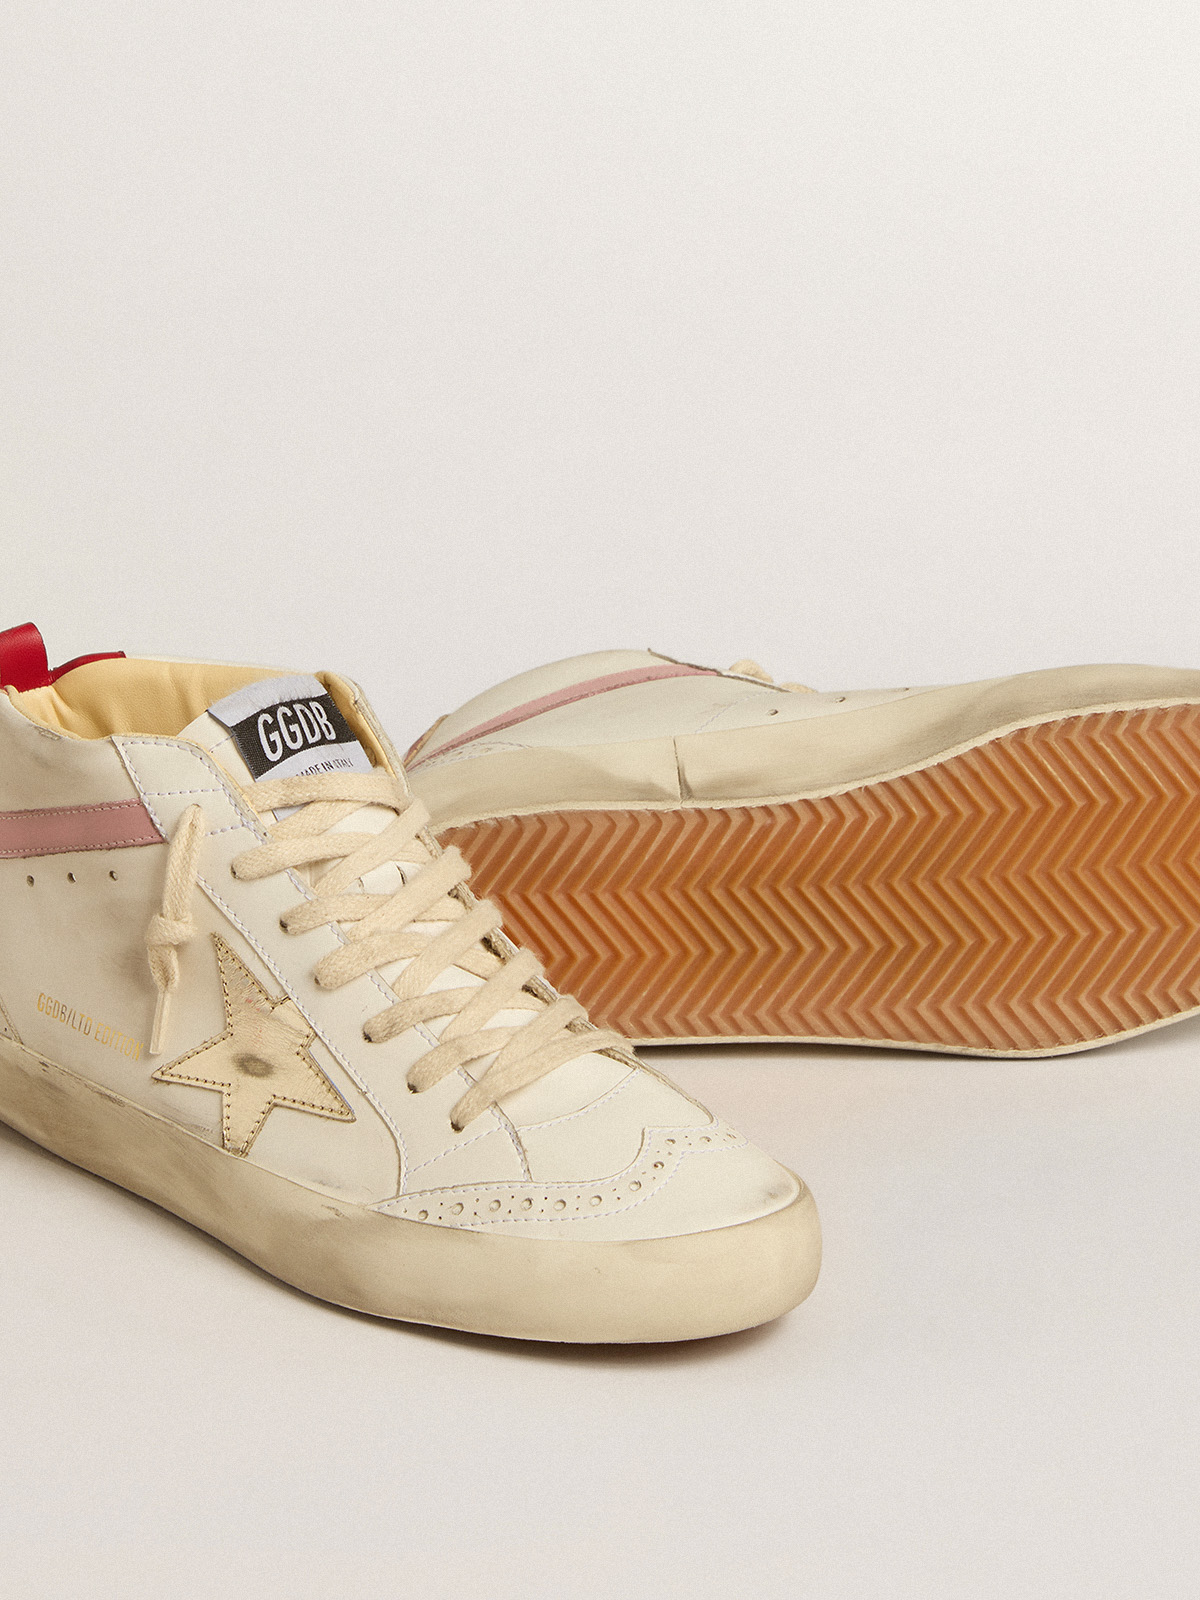 Bio-based Mid Star LTD with gold leather star and pink flash | Golden Goose